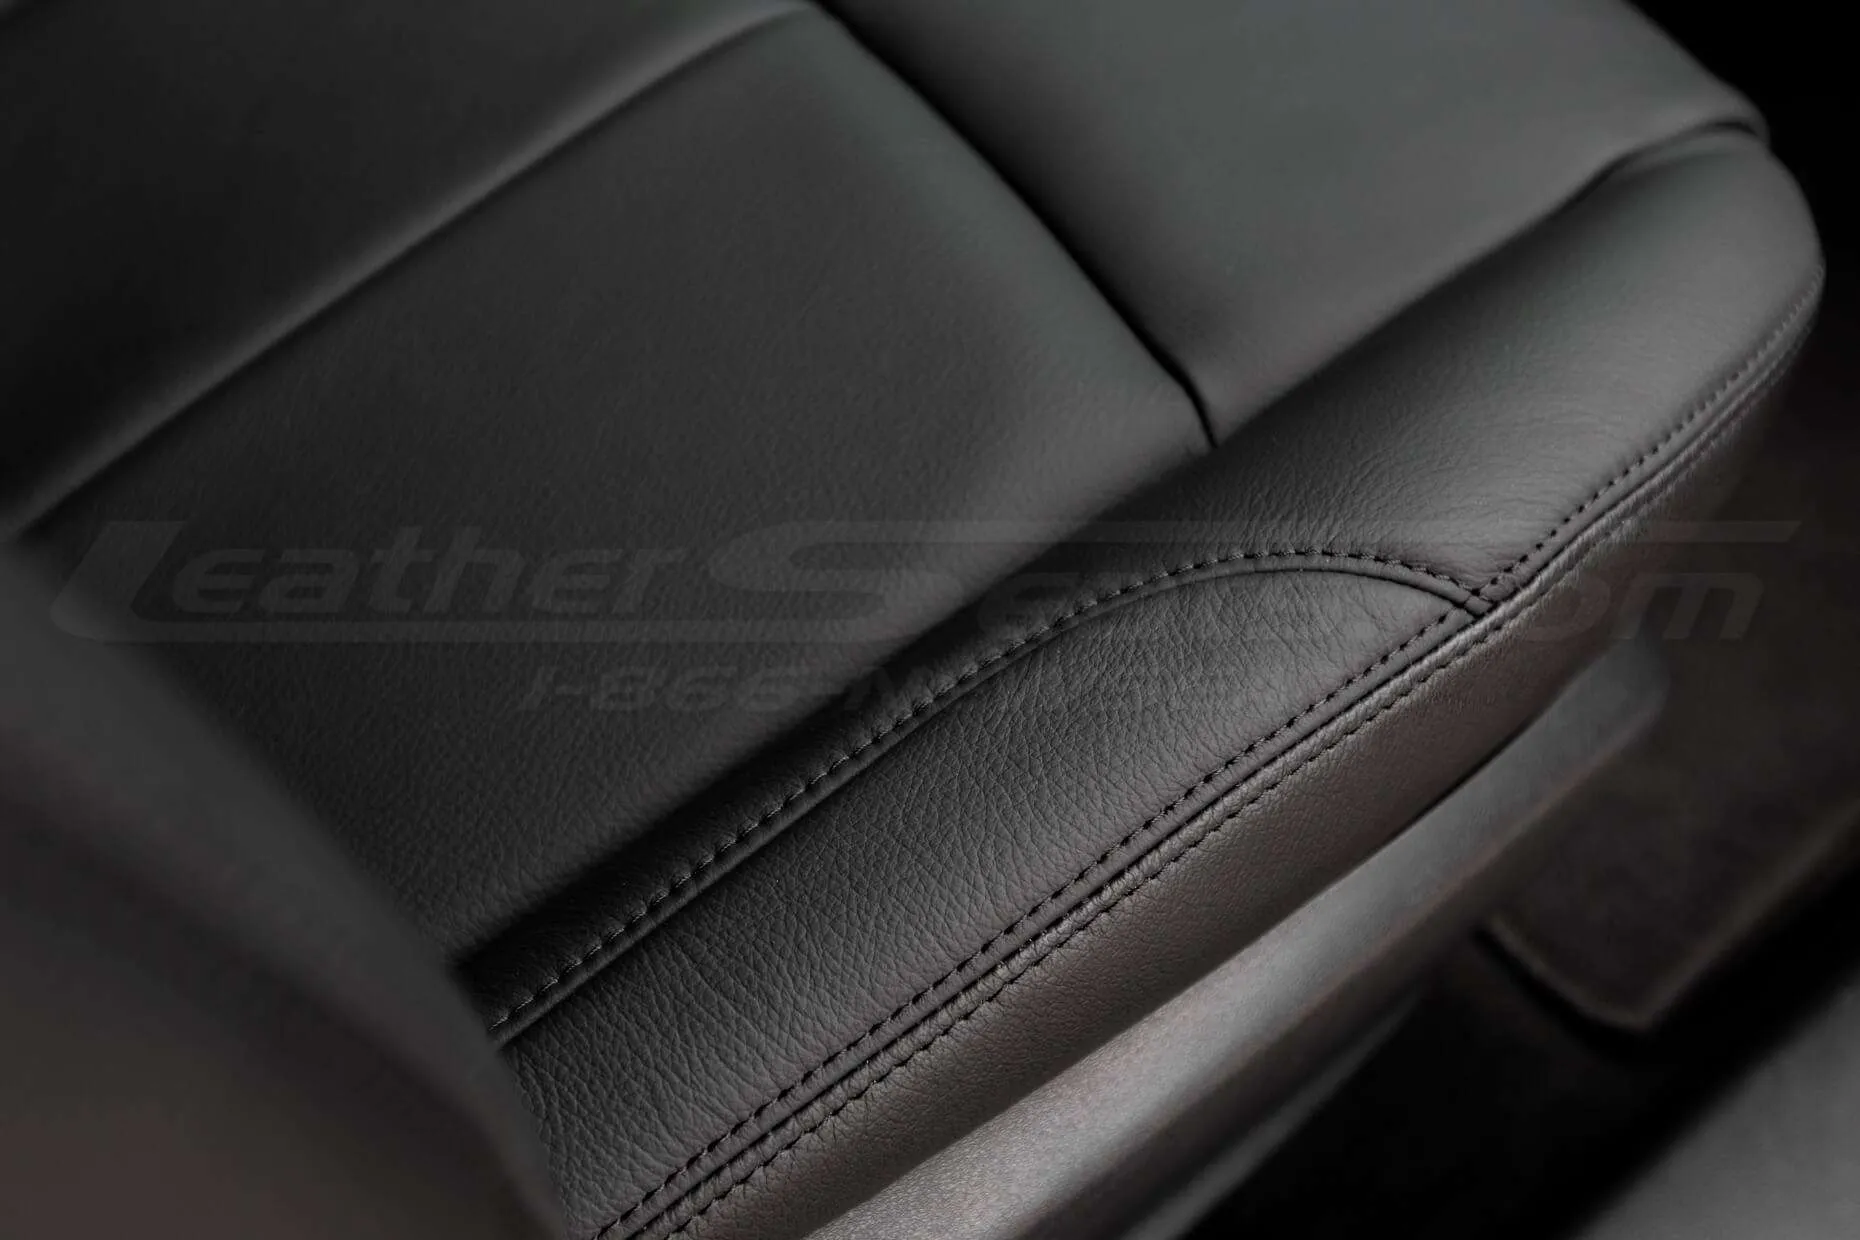 Nissan Sentra Leather Seats - Black - Installed - Seat cushion double-stitching